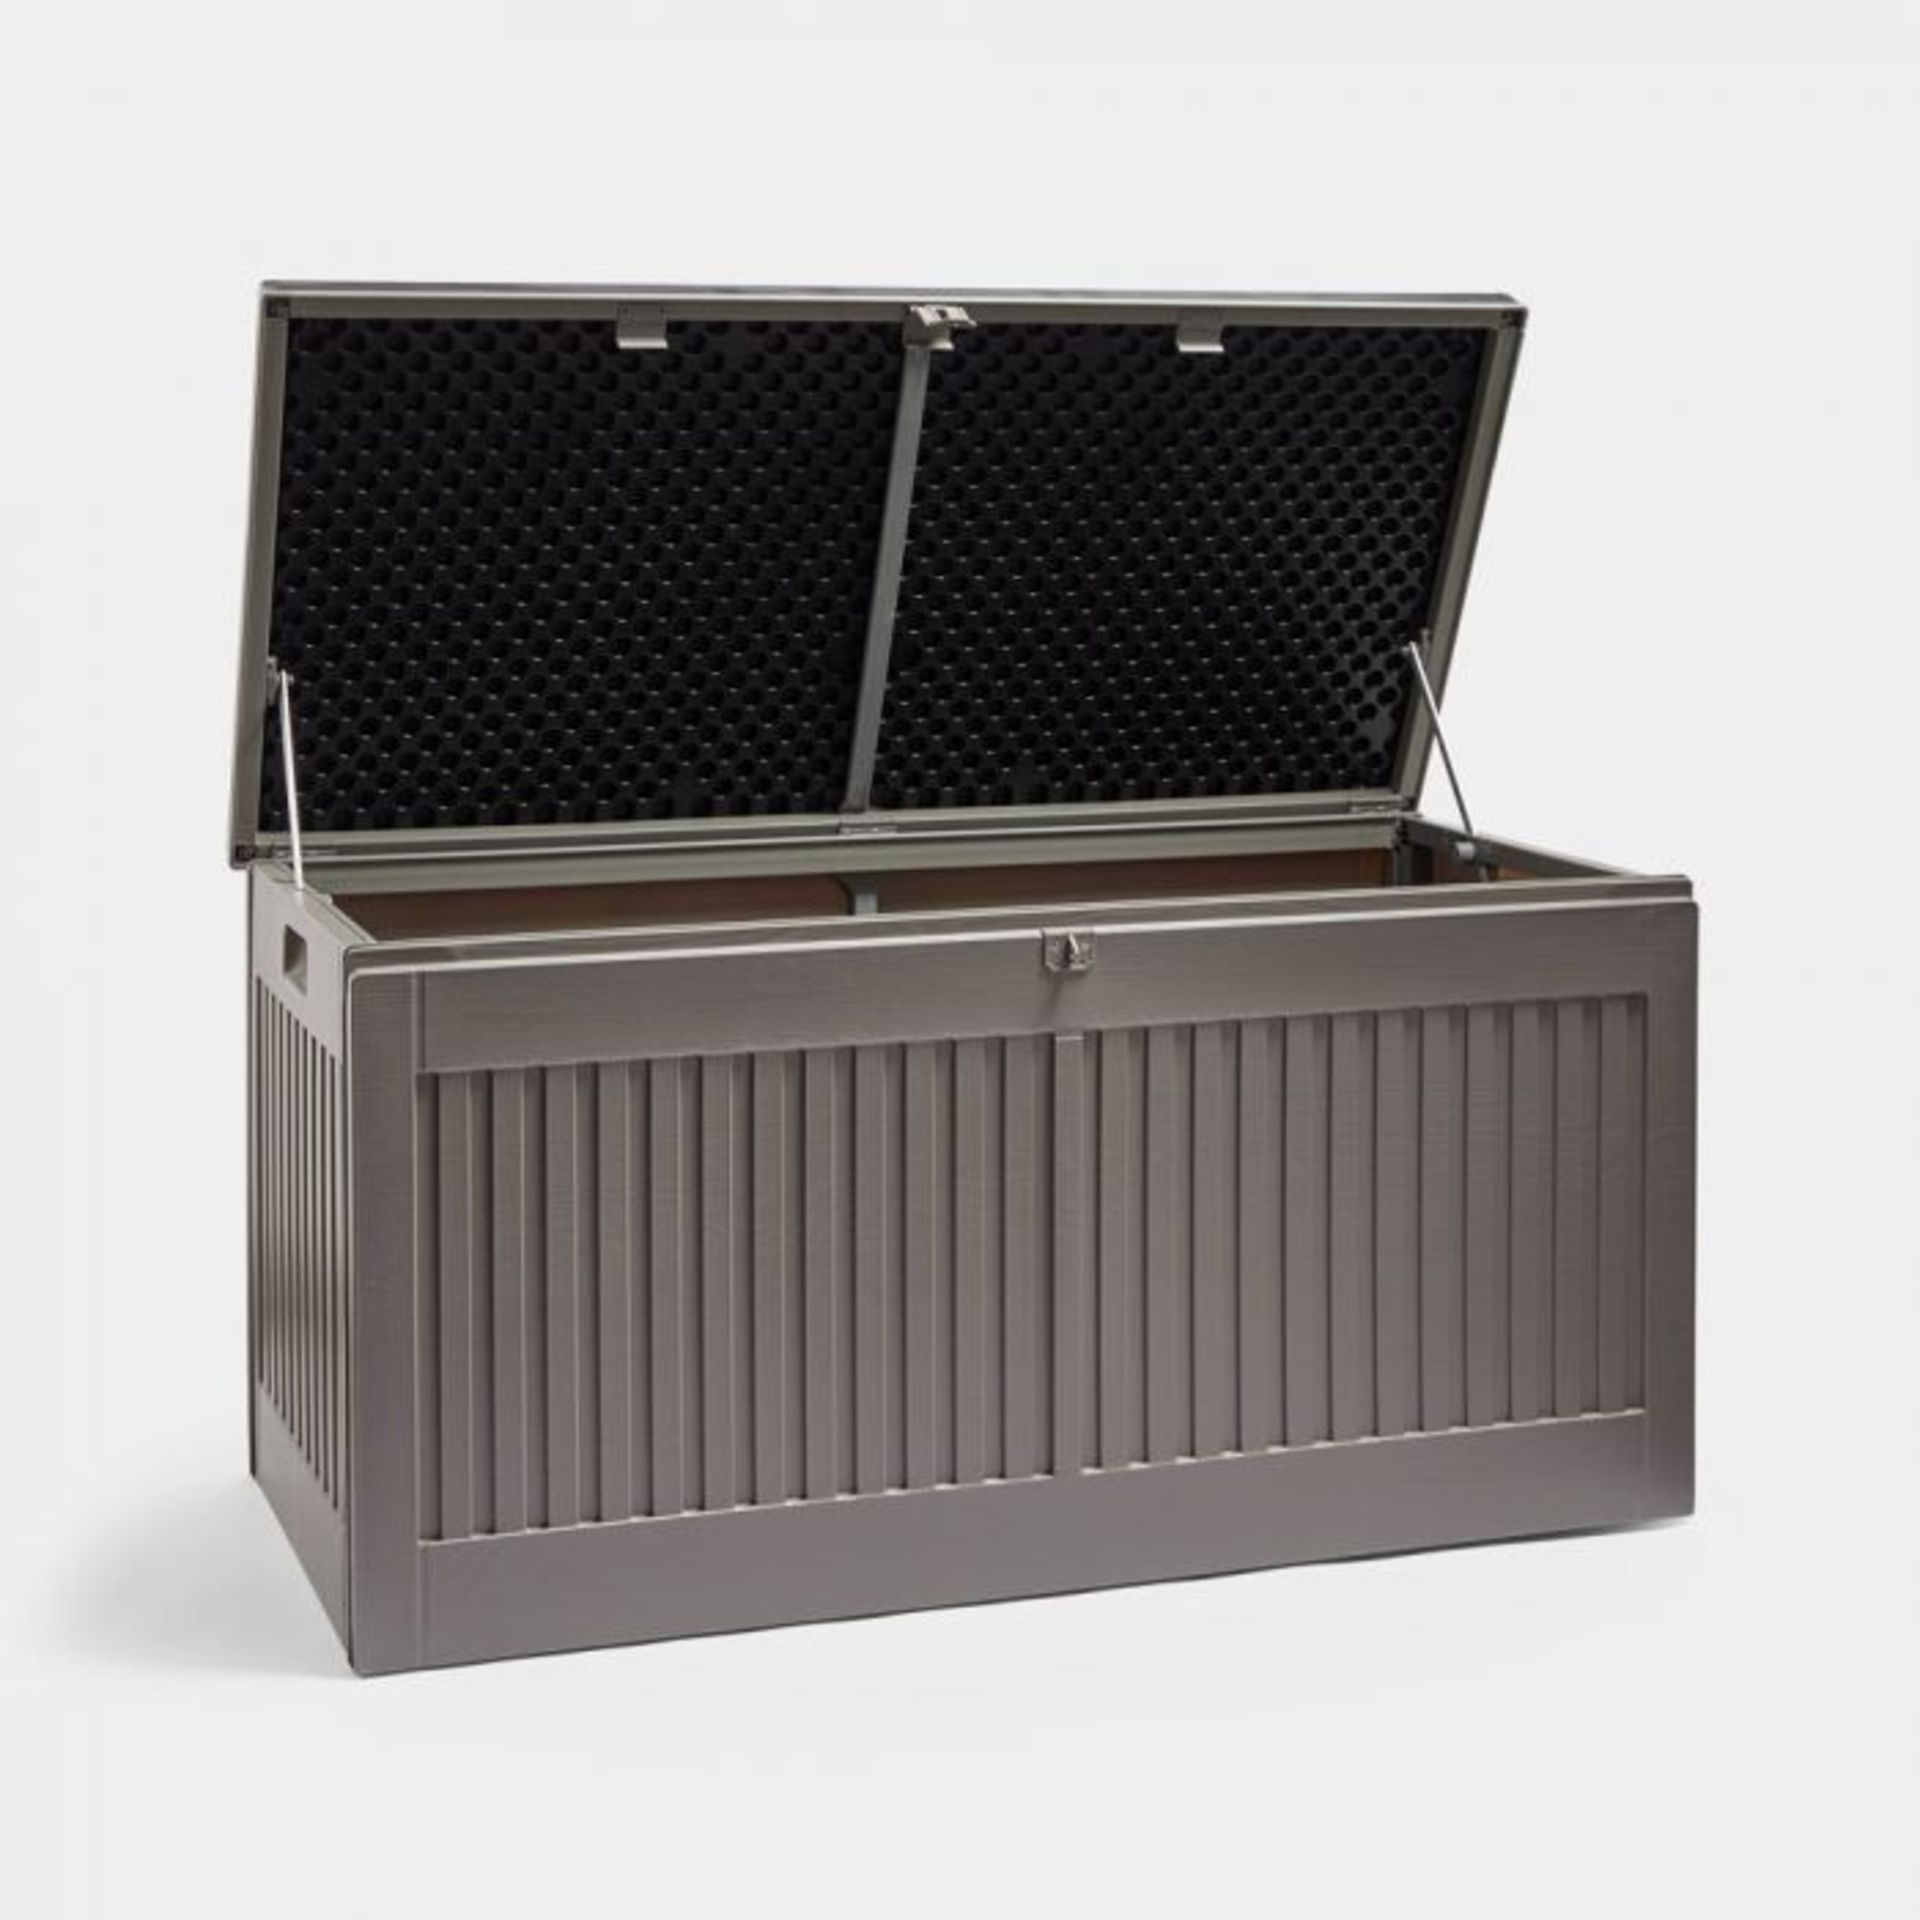 270L Plastic Outdoor Storage Box. Slam-proof and smooth, easy access whilst avoiding trapped